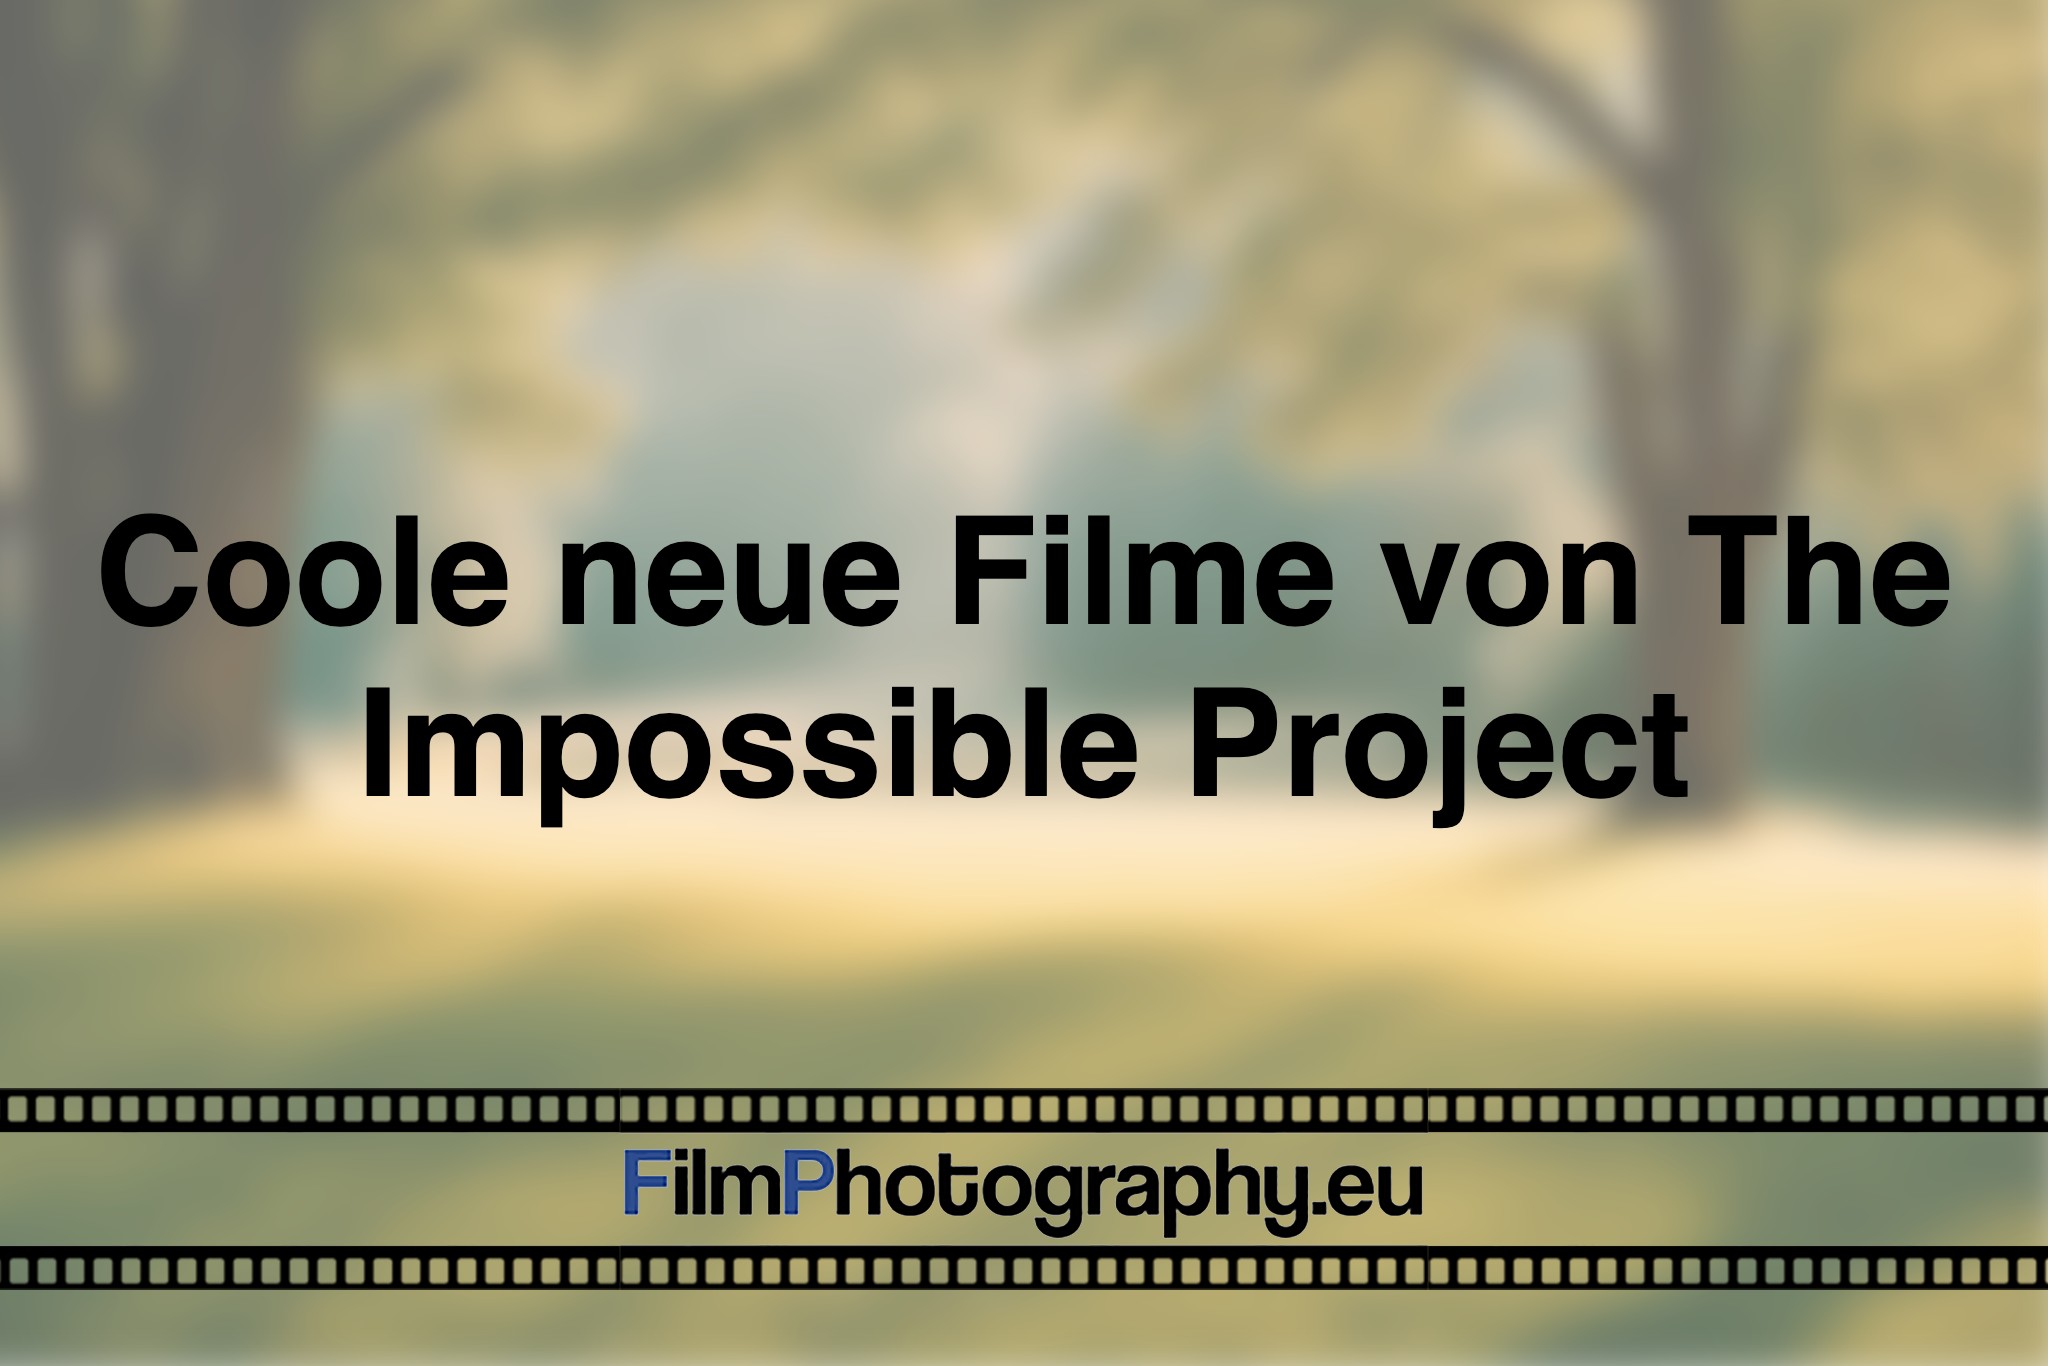 coole-neue-filme-von-the-impossible-project-photo-bnv